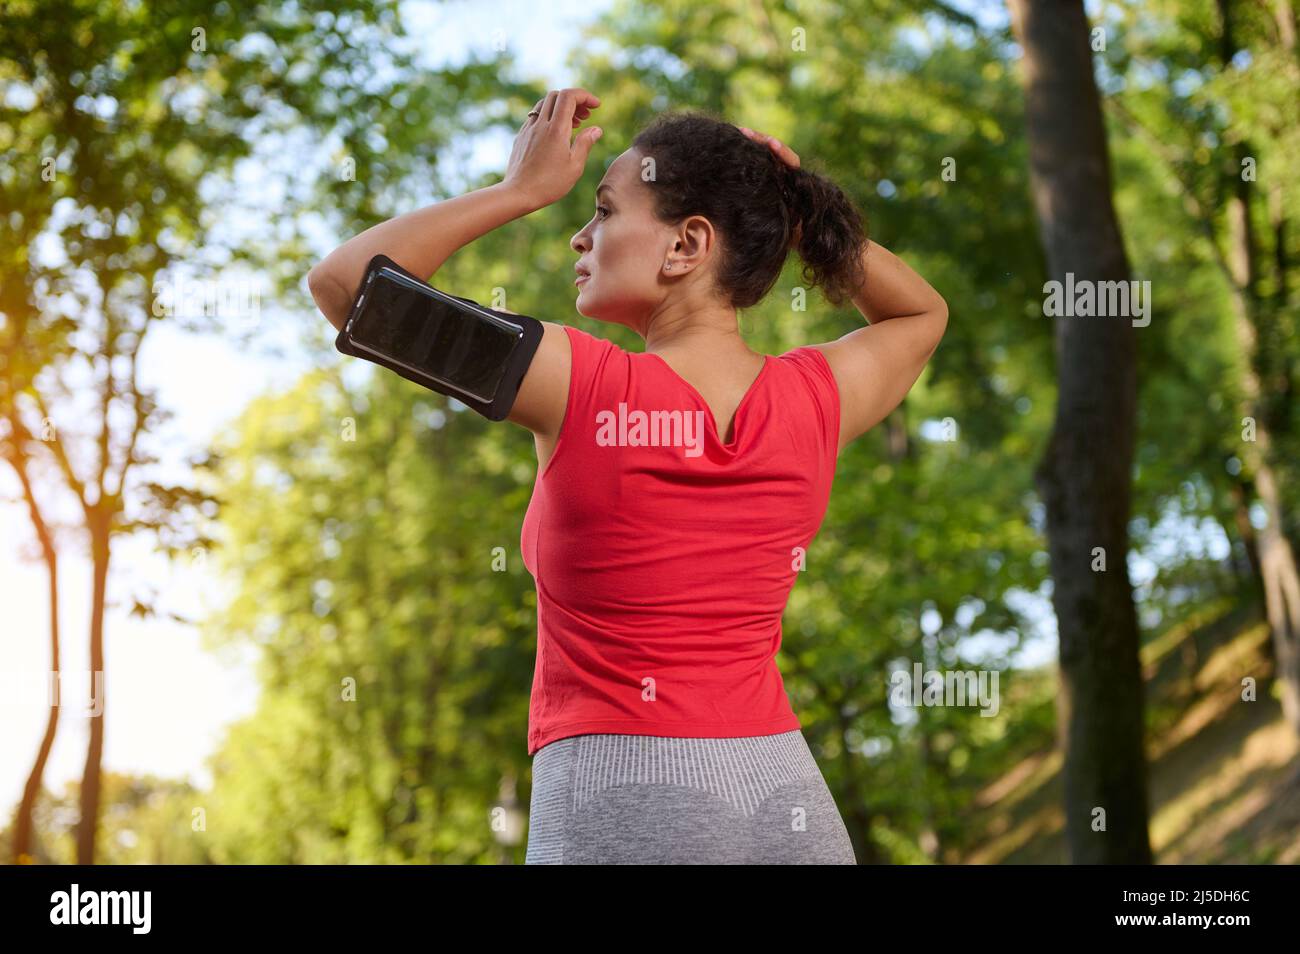 Rear view of a sportswoman wearing a smartphone holder, tying ponytail, getting ready for run along the city park outdoor Stock Photo